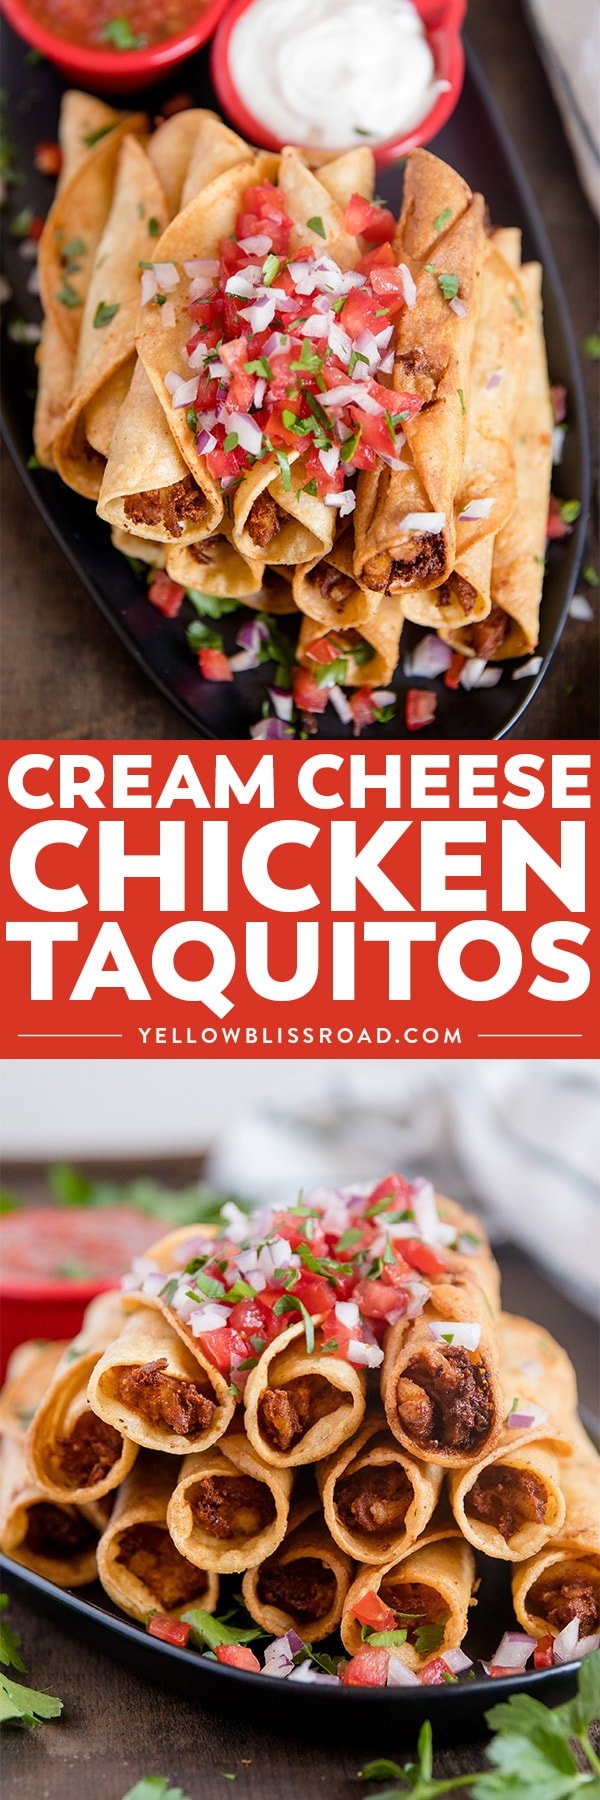 Chicken Taquitos with Cream Cheese collage with 2 photos